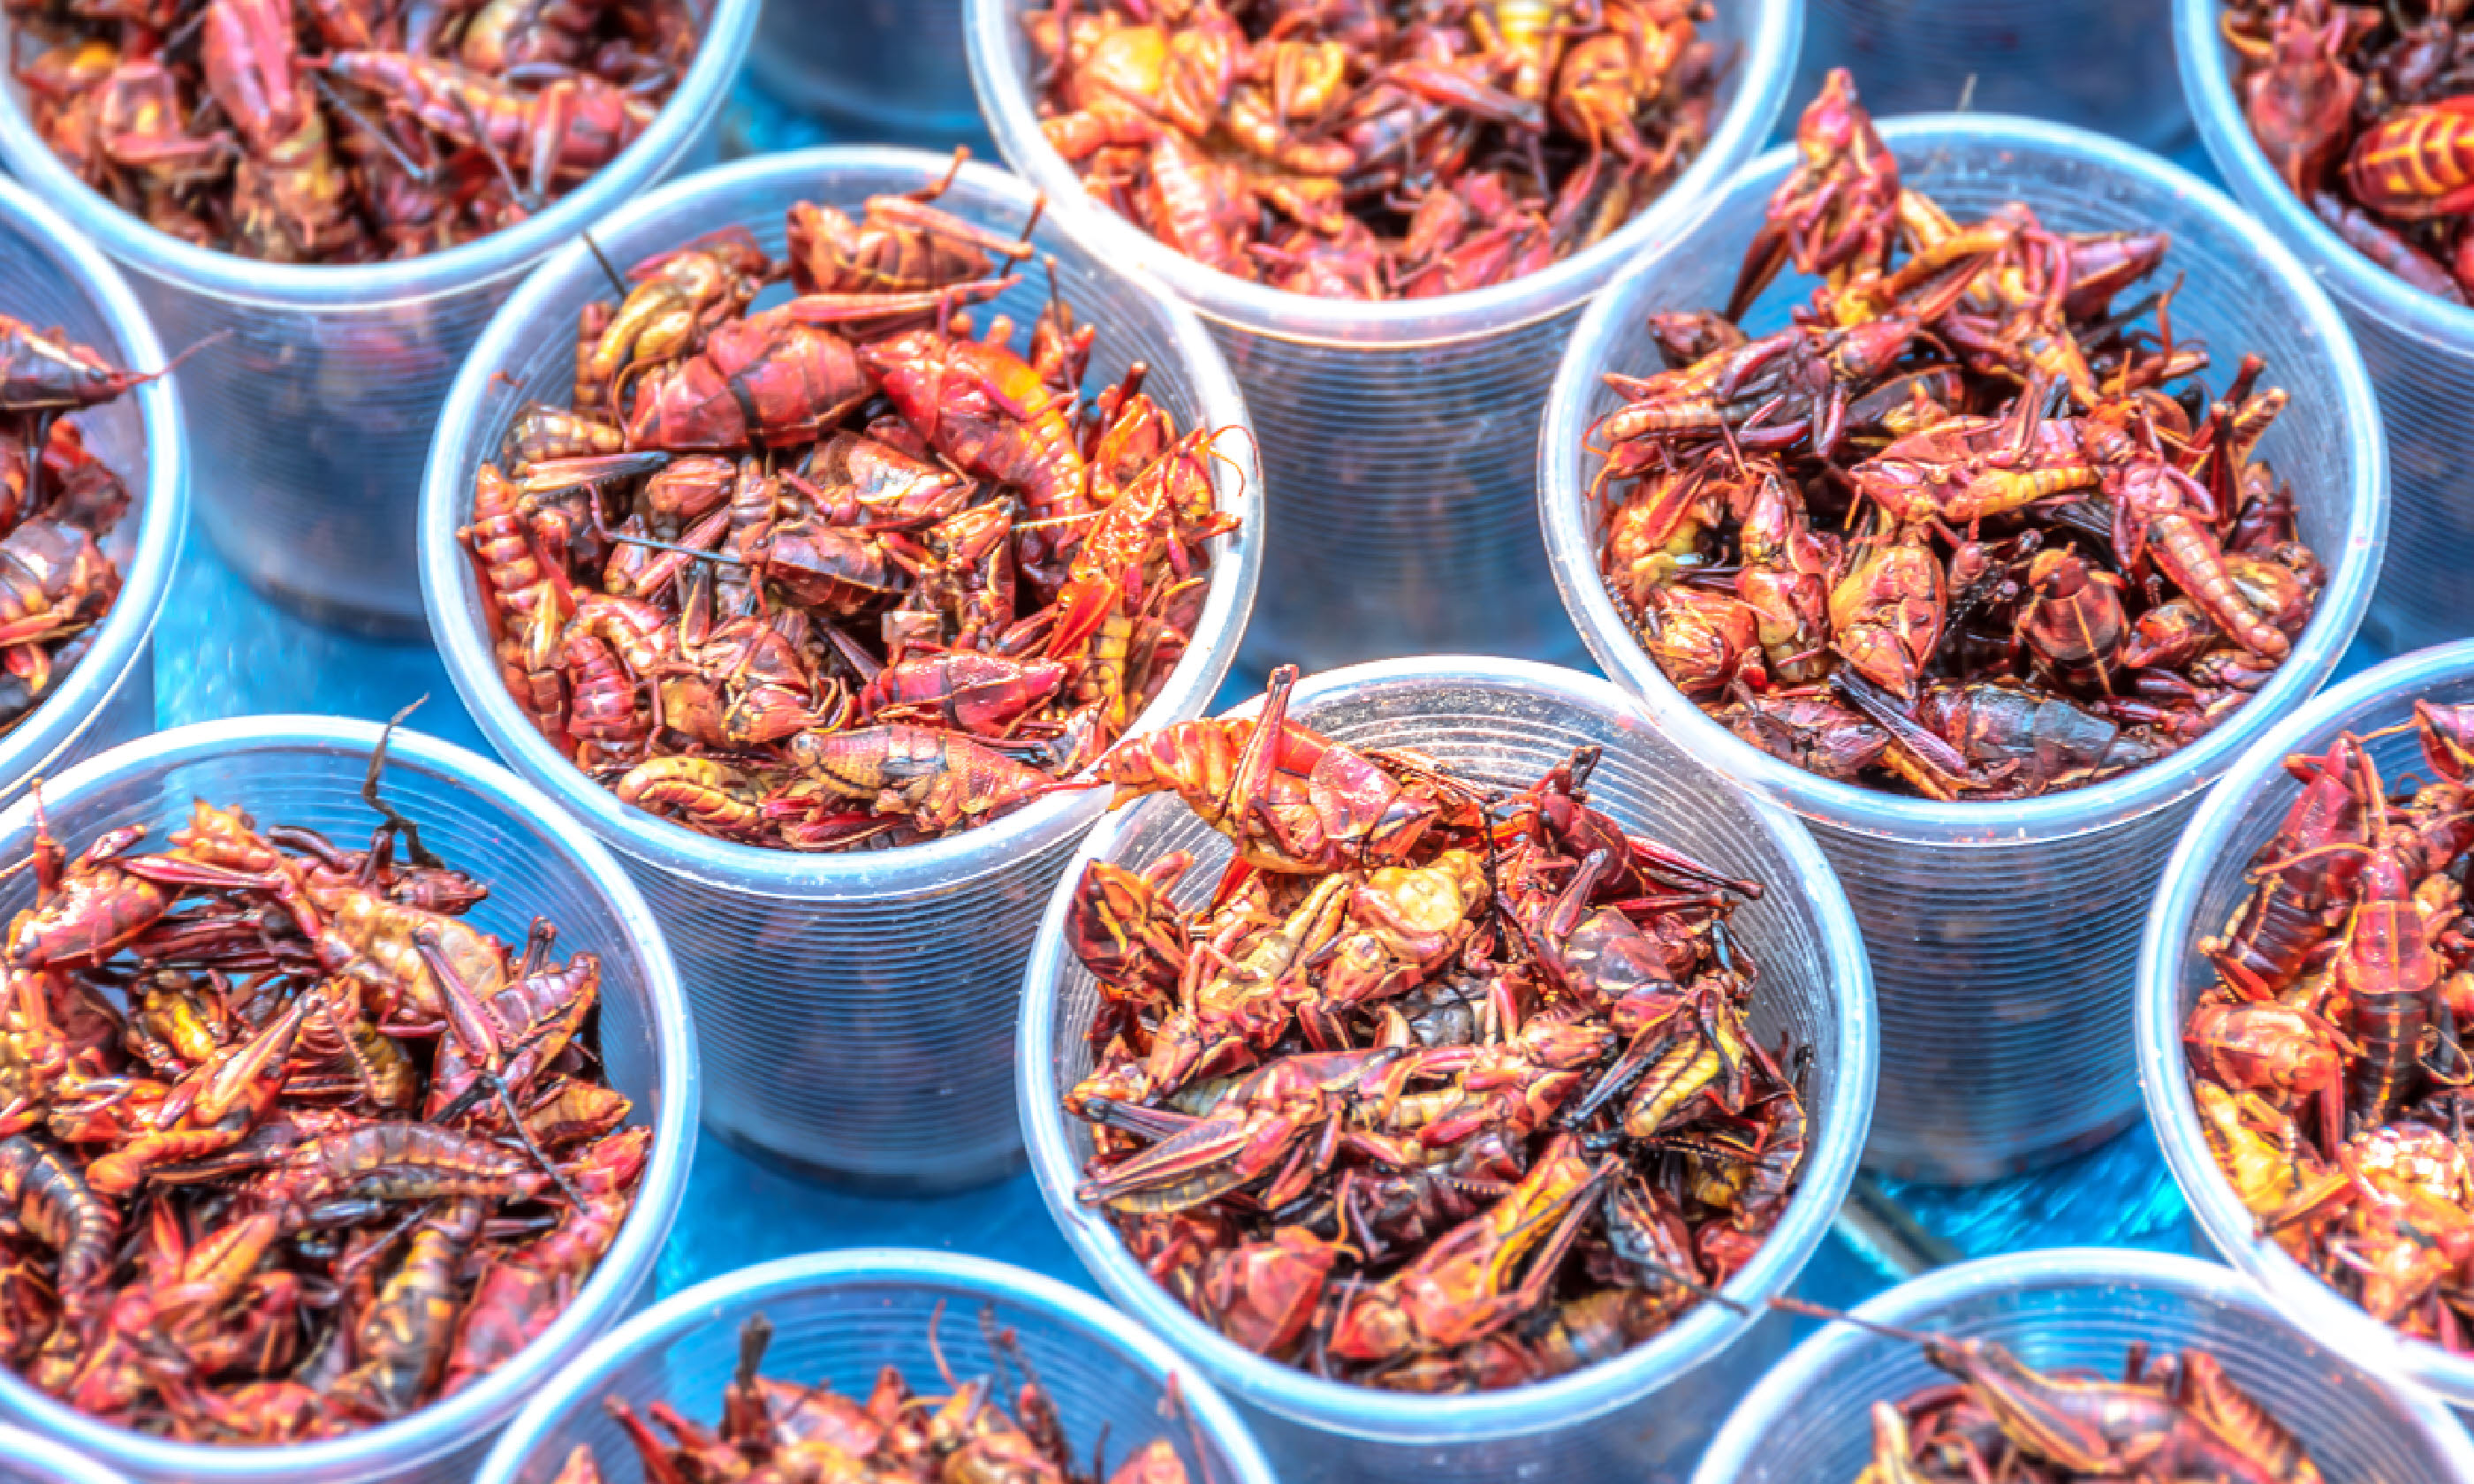 Grasshoppers in Mexico (Shutterstock)